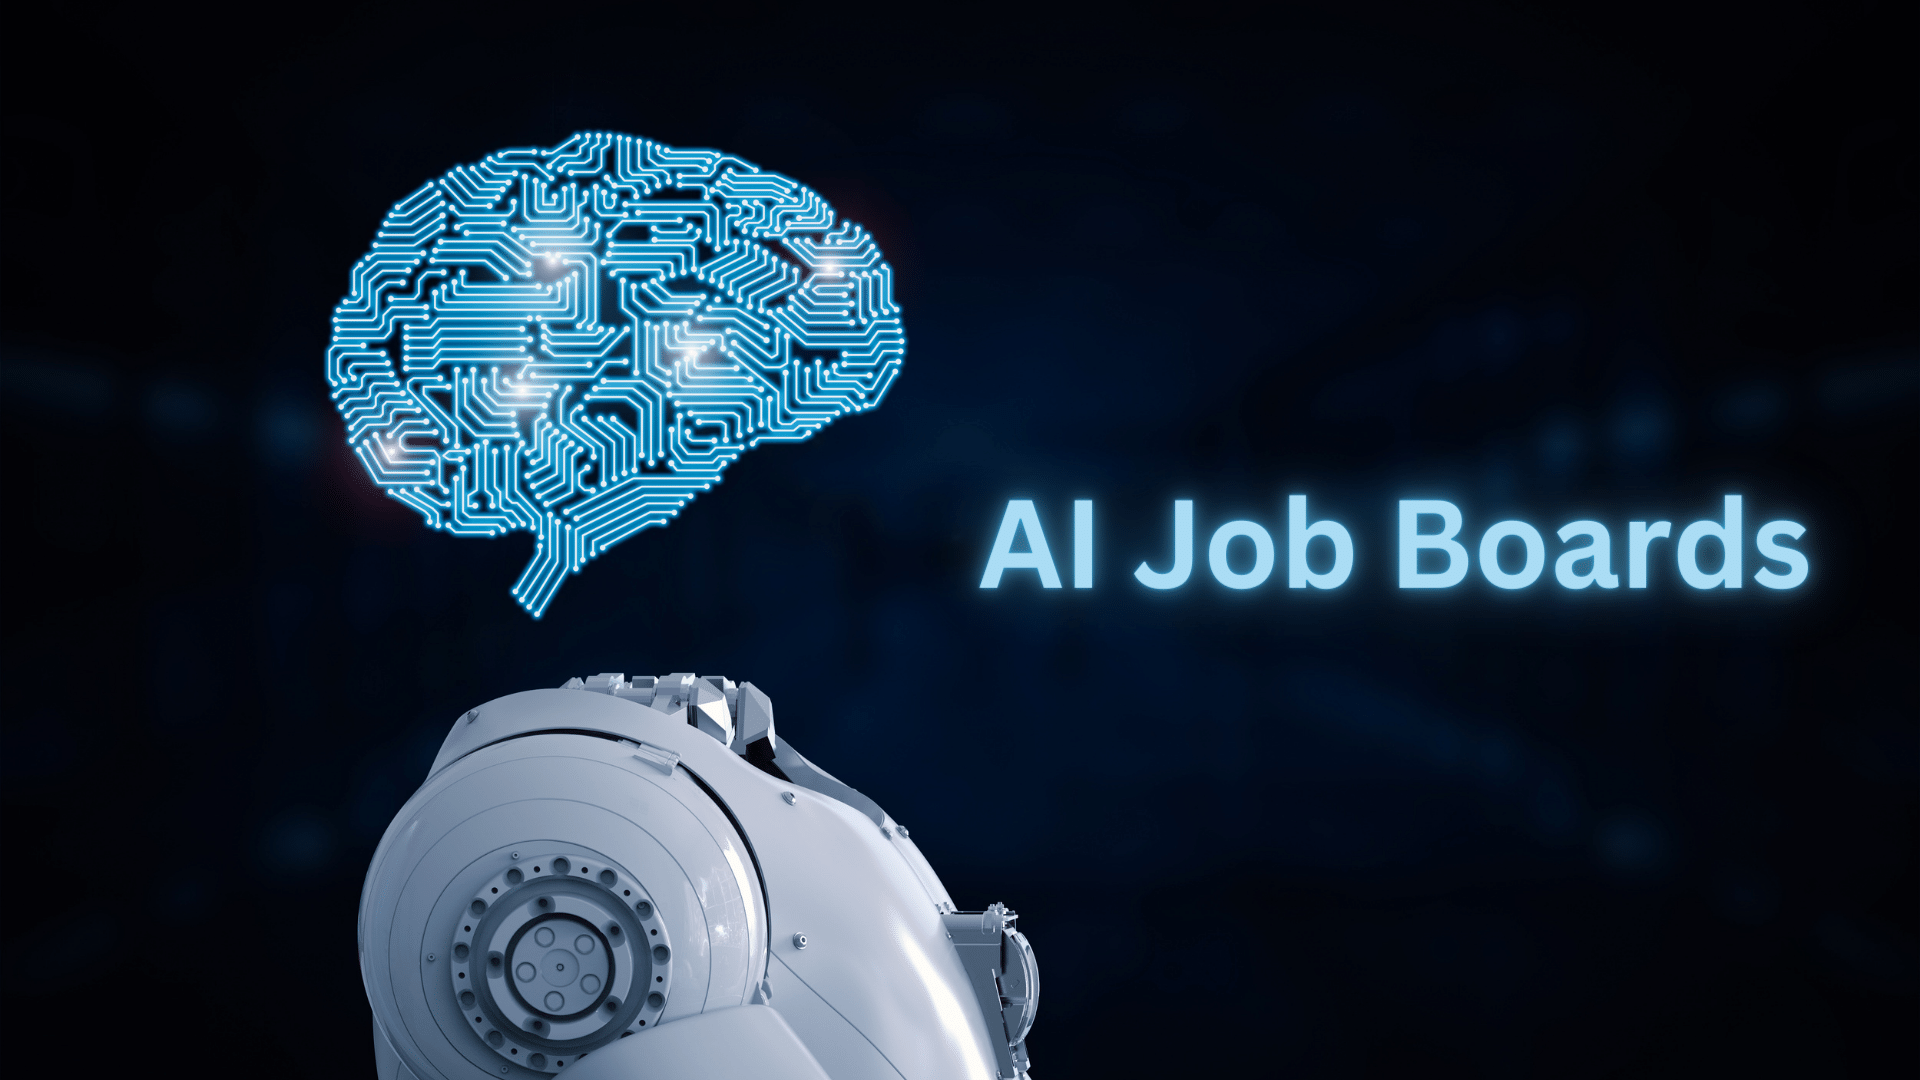 Which jobs are provided by AI?